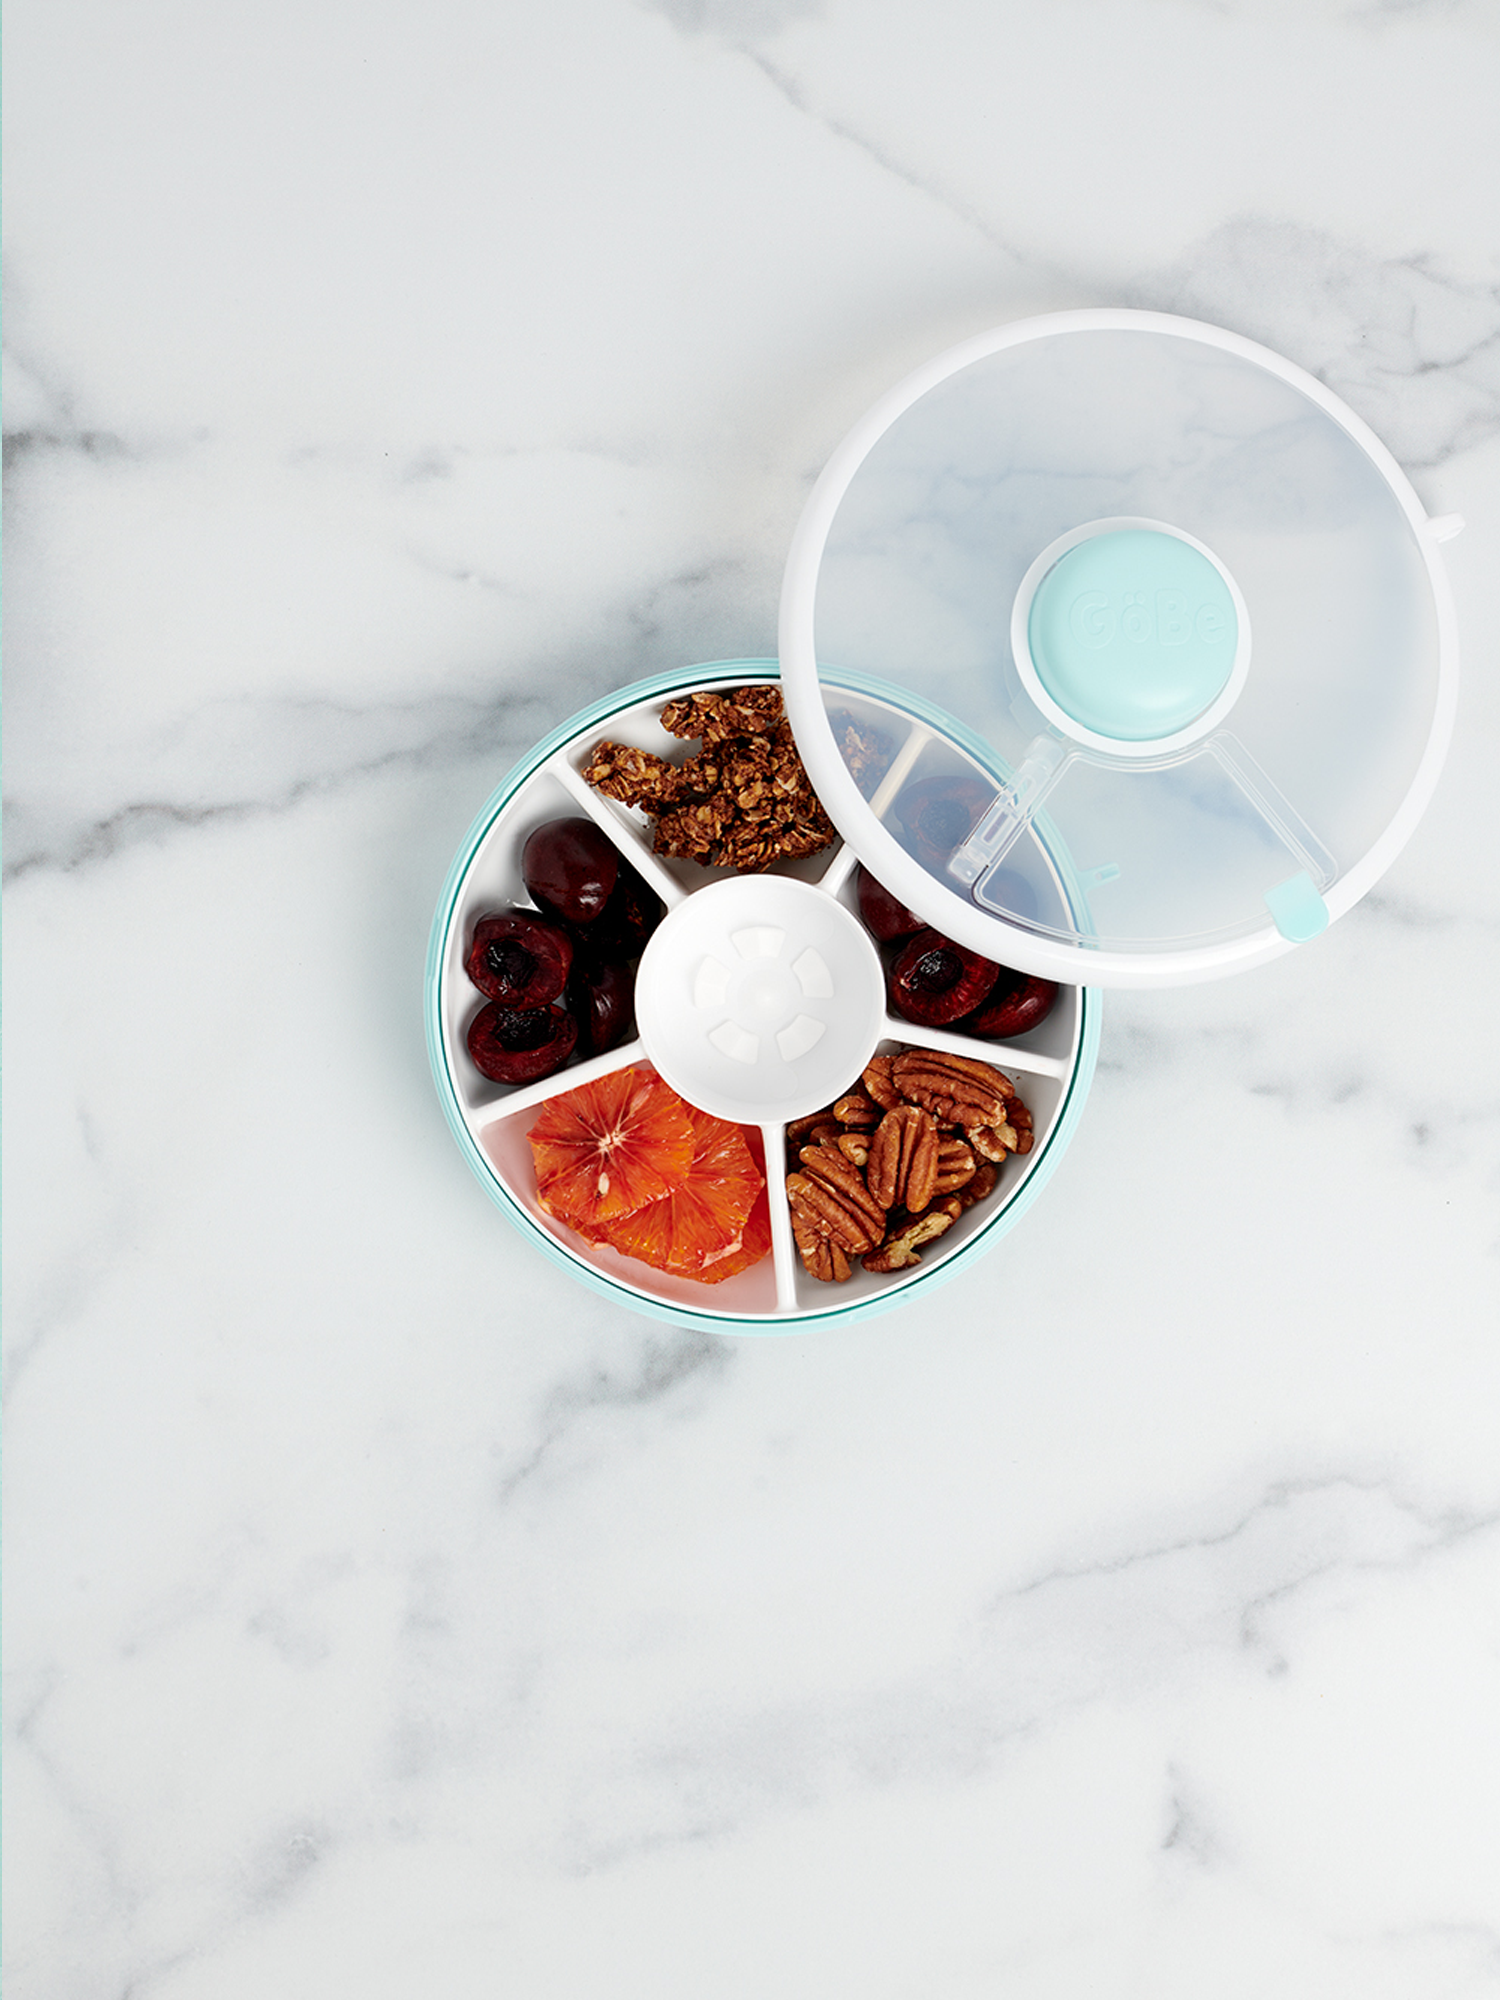 BACK IN STOCK 😍 save to find later! The GoBe Snack Spinner Lunch